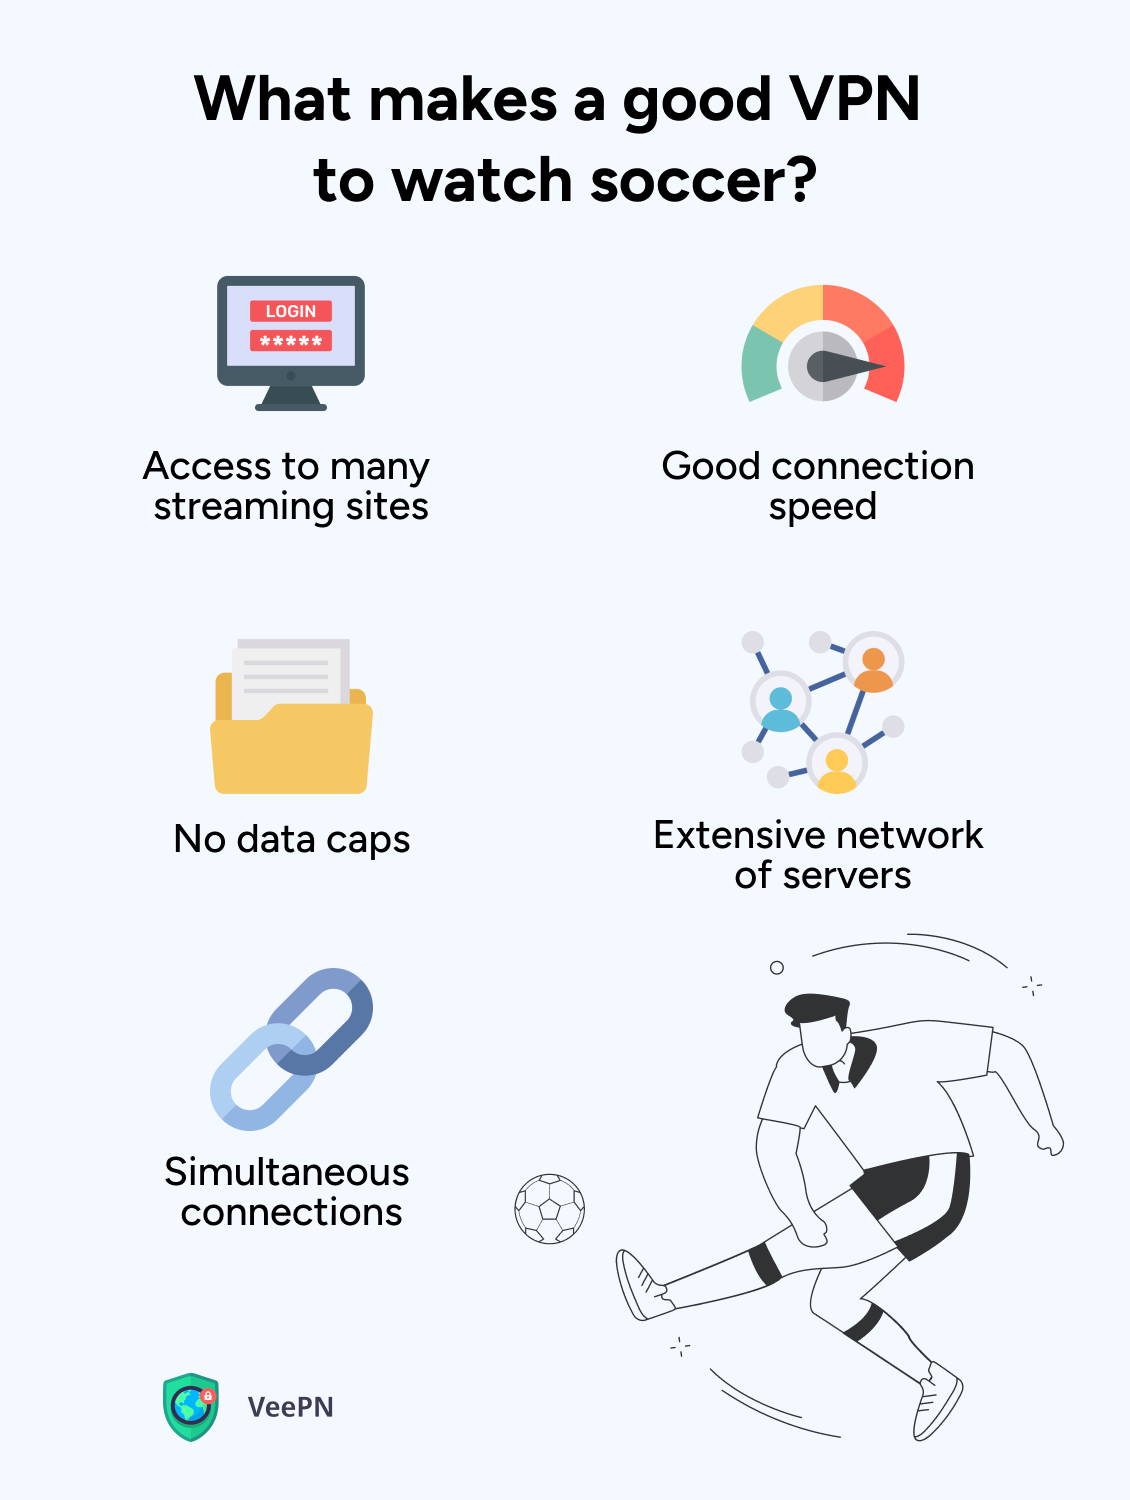 How to watch live football matches with a VPN